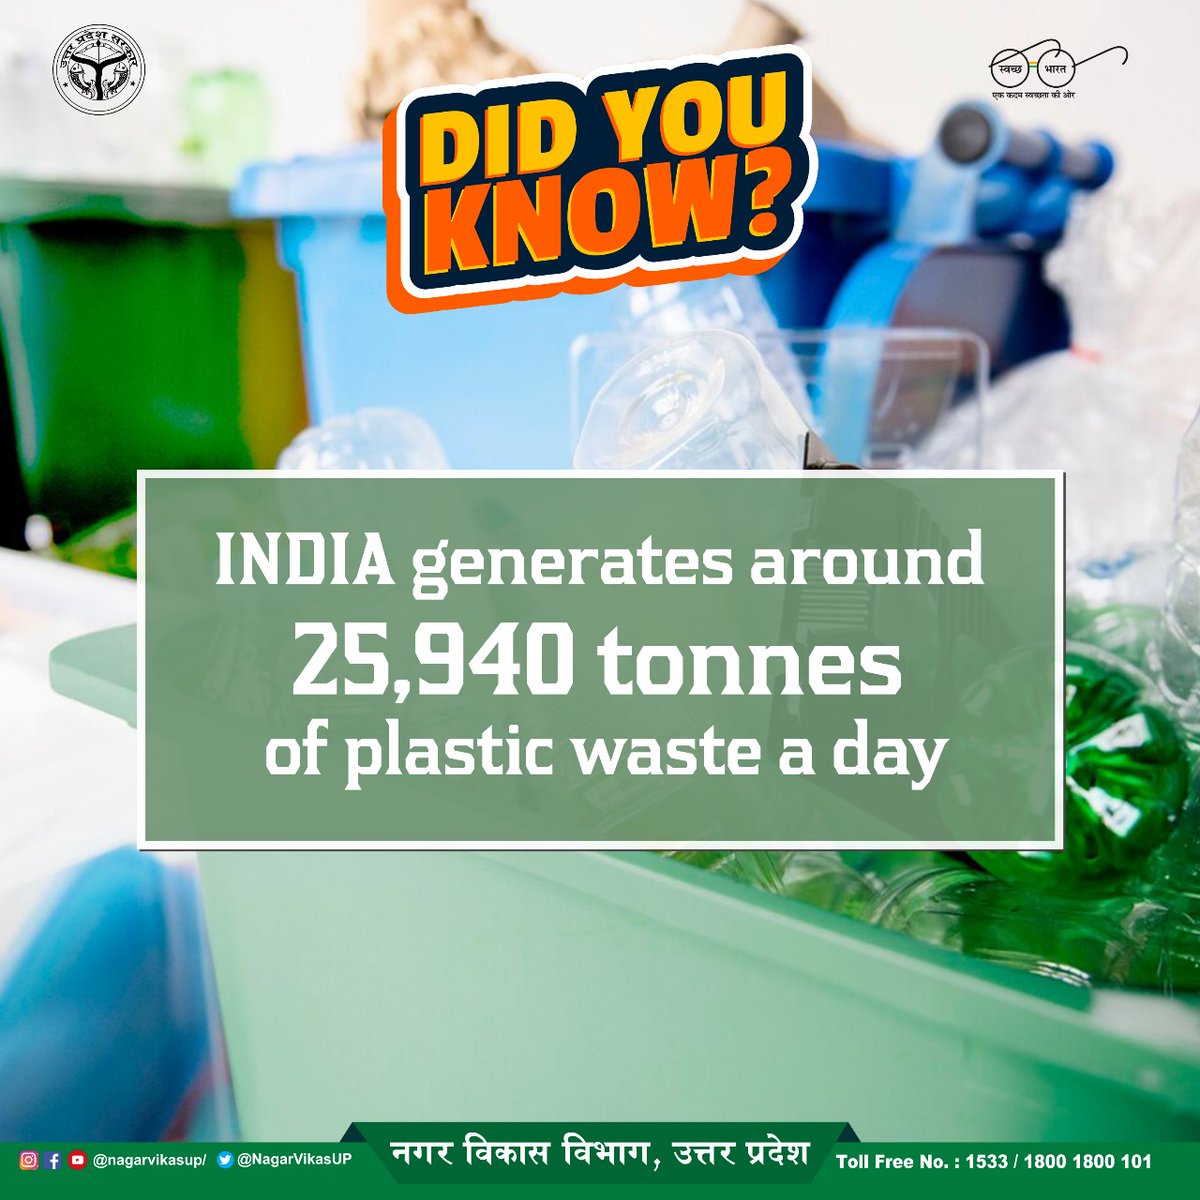 'The numbers don't lie: INDIA is generating a shocking 25,940 tonnes of plastic waste daily. It's time we take a stand and say no to plastic. Together, we can create a cleaner and healthier future. 🙌🌍 #BreakUpWithPlastic #ChooseSustainability'